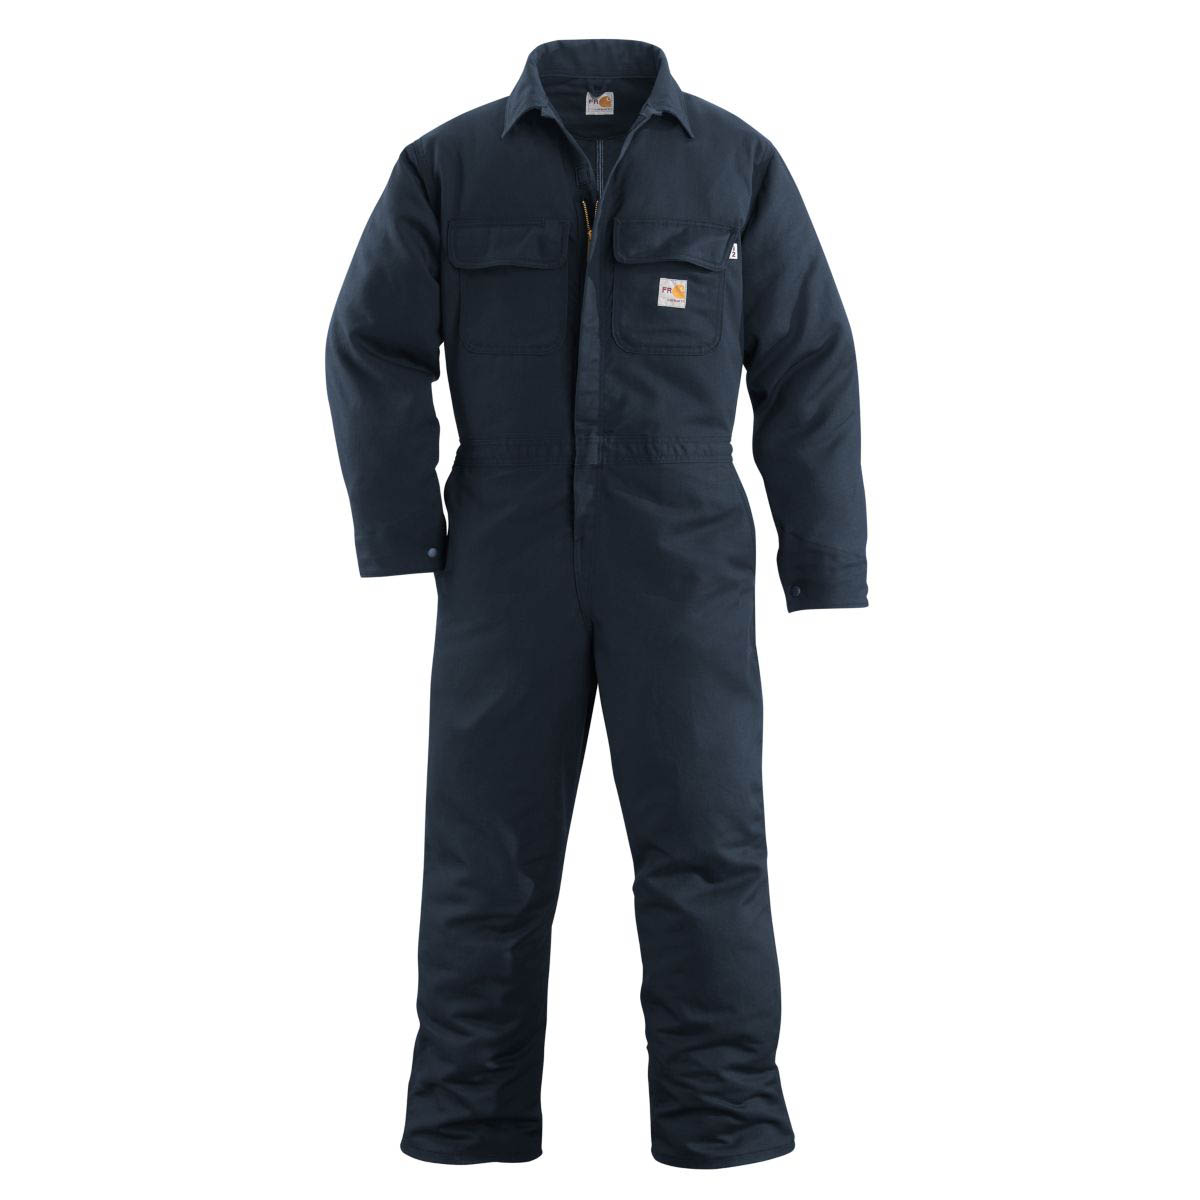 Carhartt Men's Flame Resistant Work Coverall